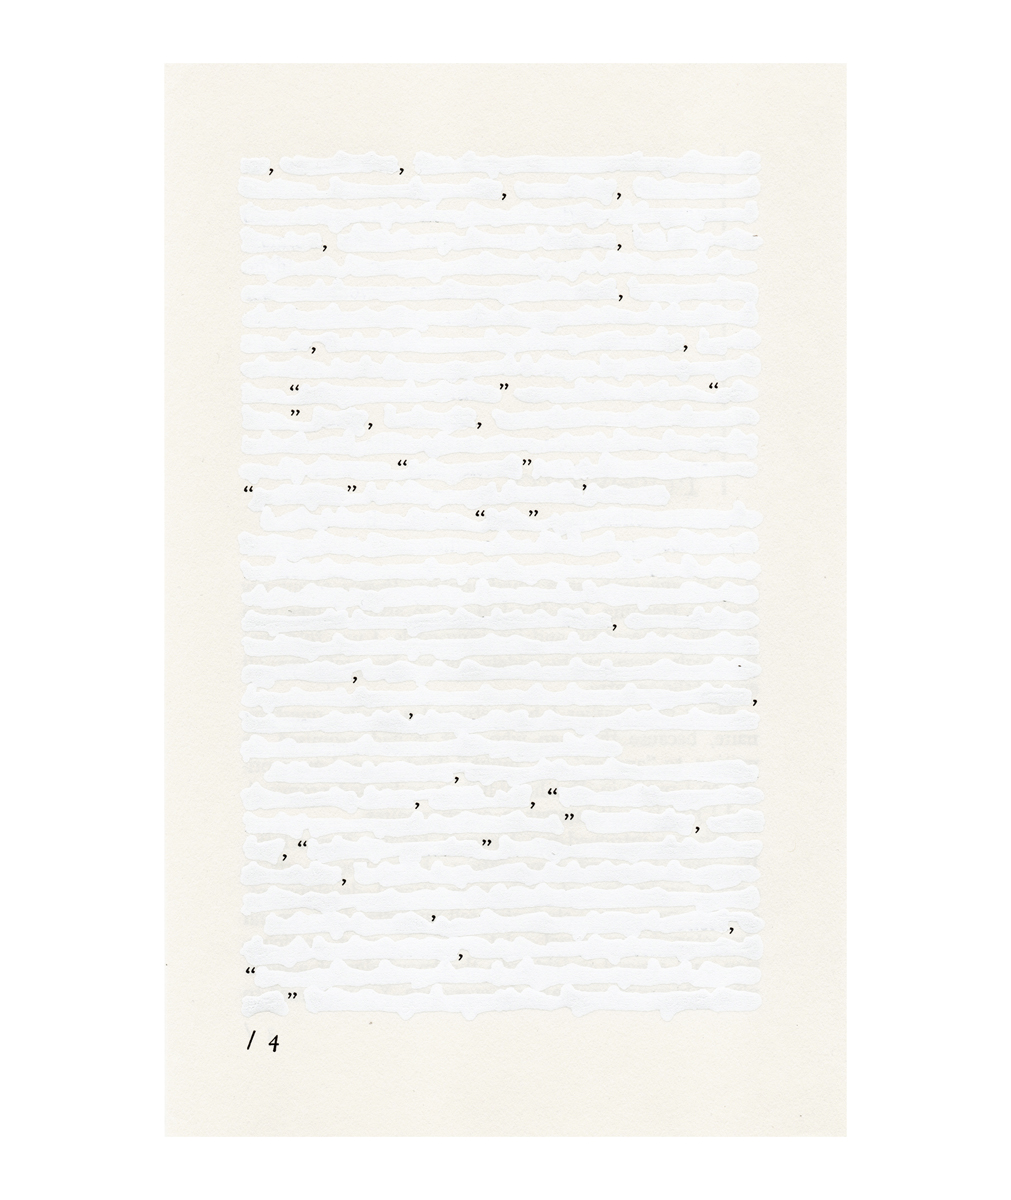 Audra_Wolowiec-09_Less_than_words_can_say_2015_Correction_fluid_on_found_book